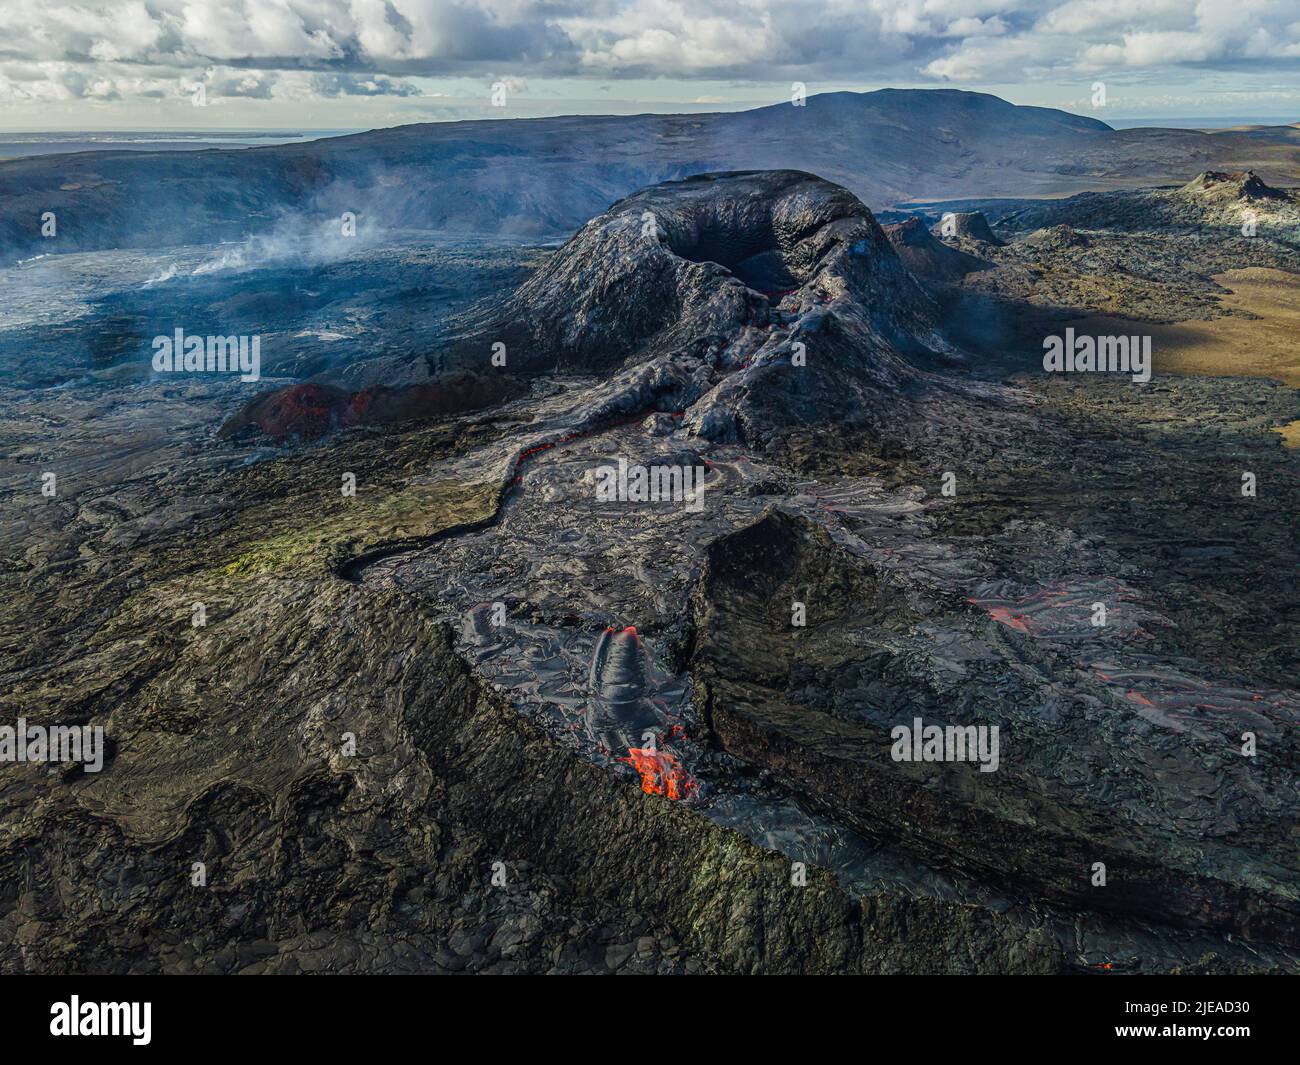 Top view of active crater on Iceland's Reykjanes Peninsula. Landscape of cooled lava flow around the crater with individual steam columns. green, blac Stock Photo